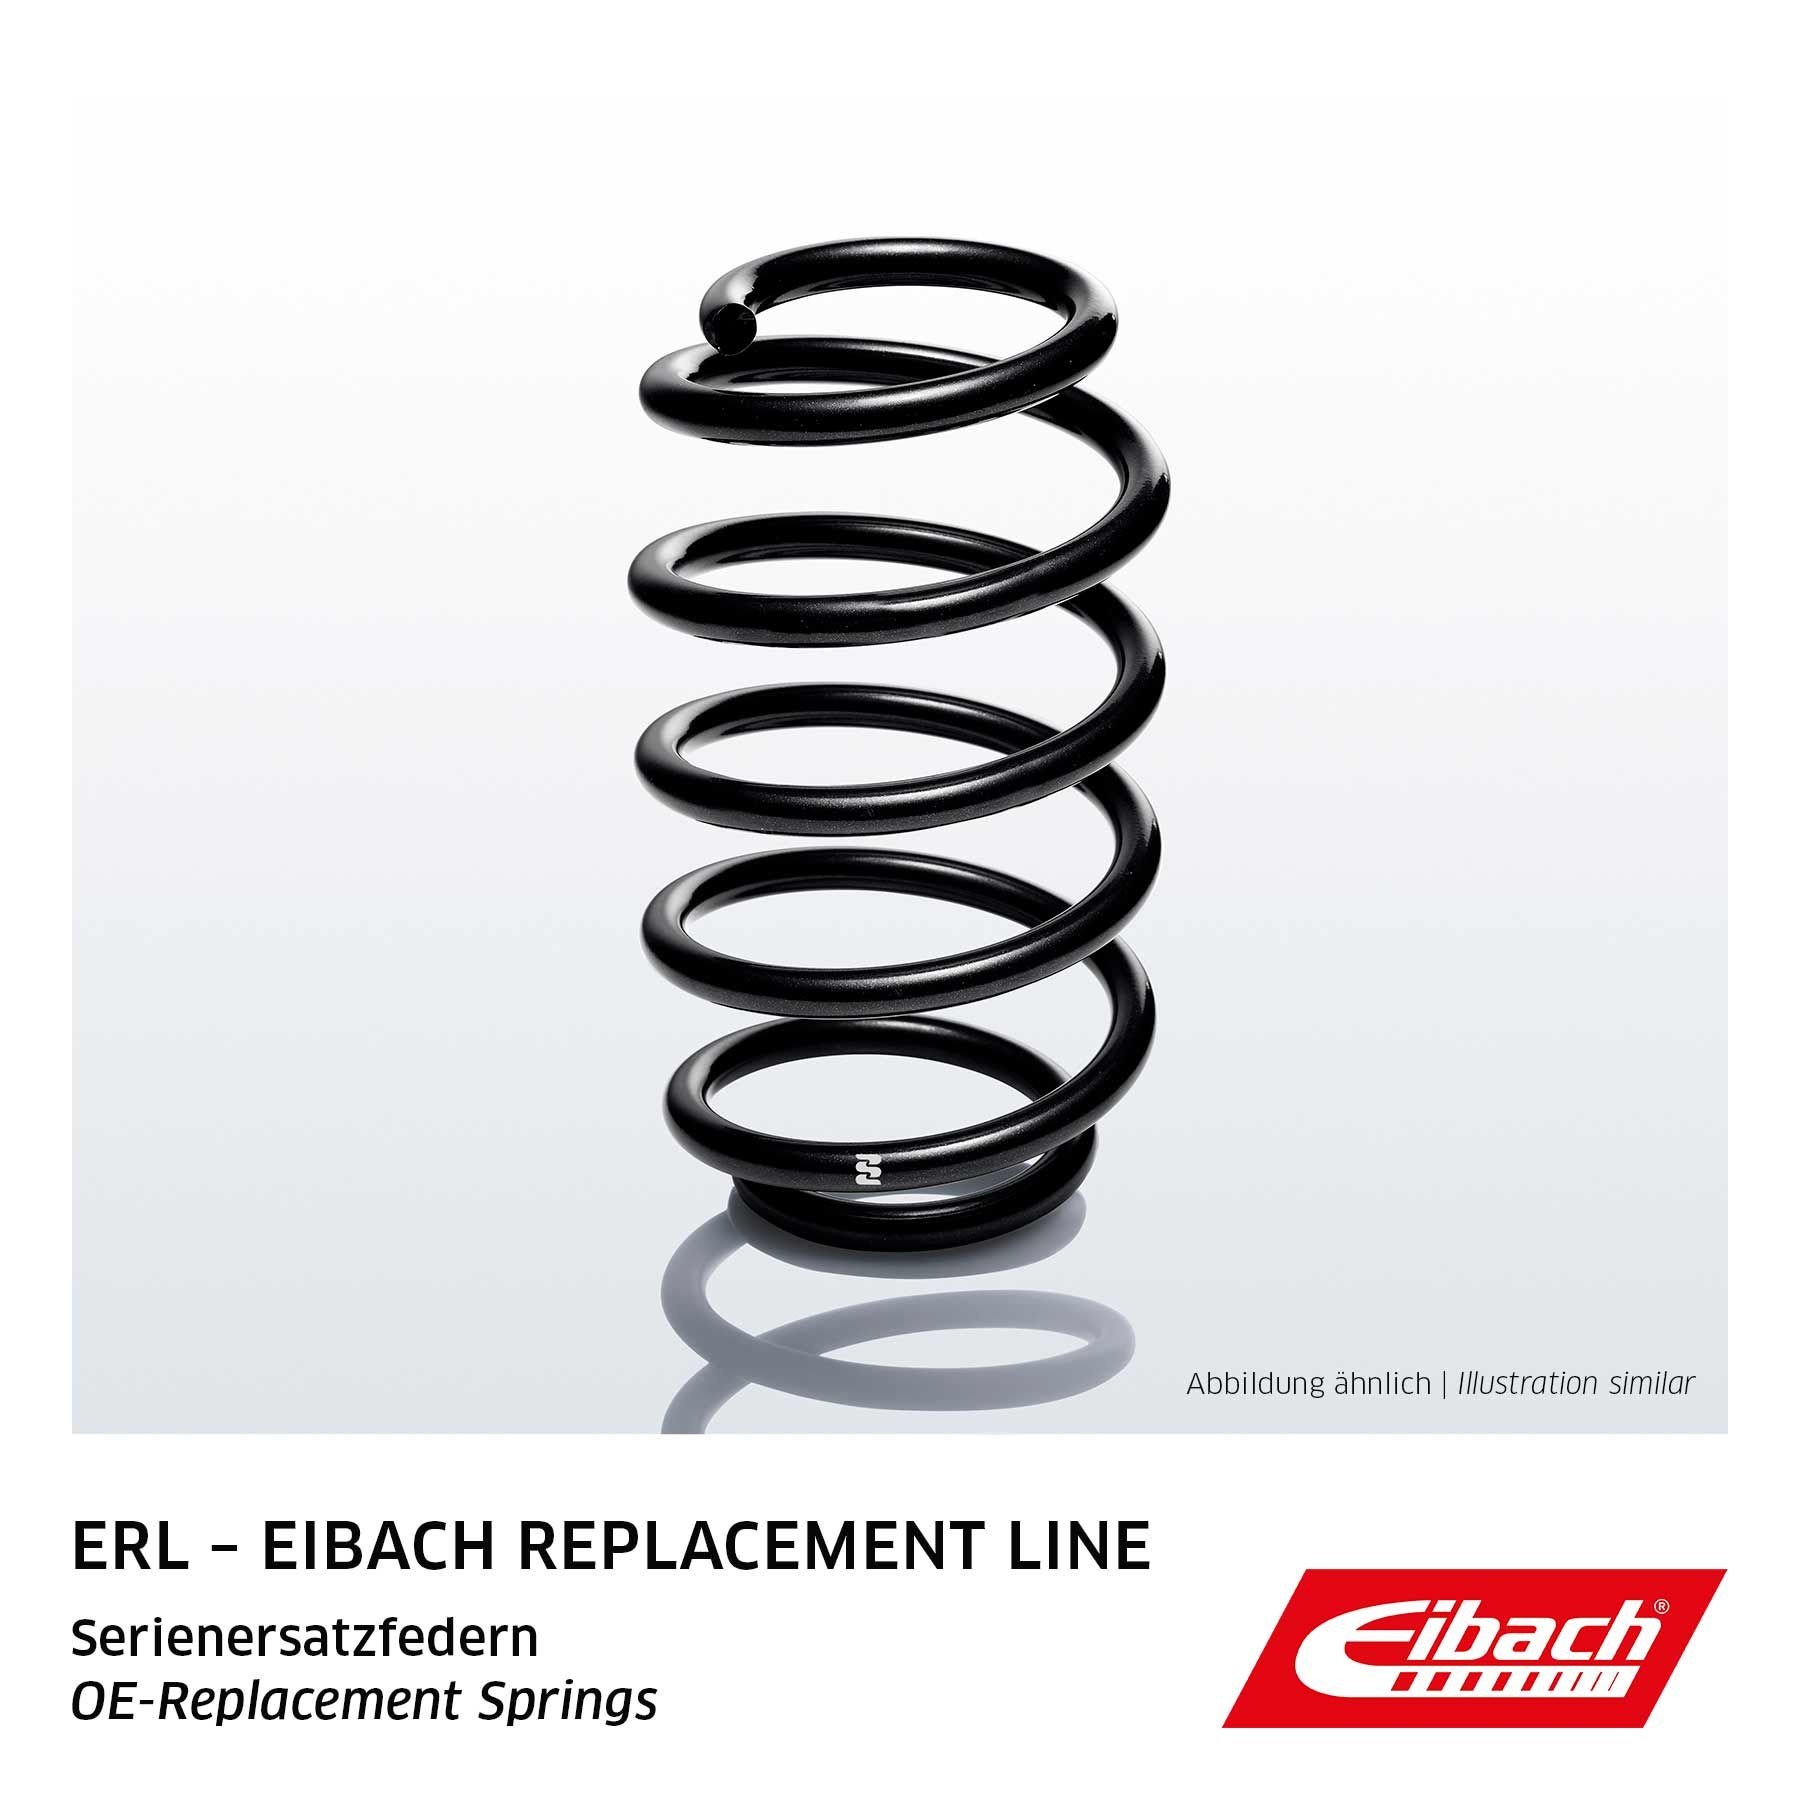 R14286 Coil spring R14286 EIBACH Front Axle, Coil spring with constant wire diameter